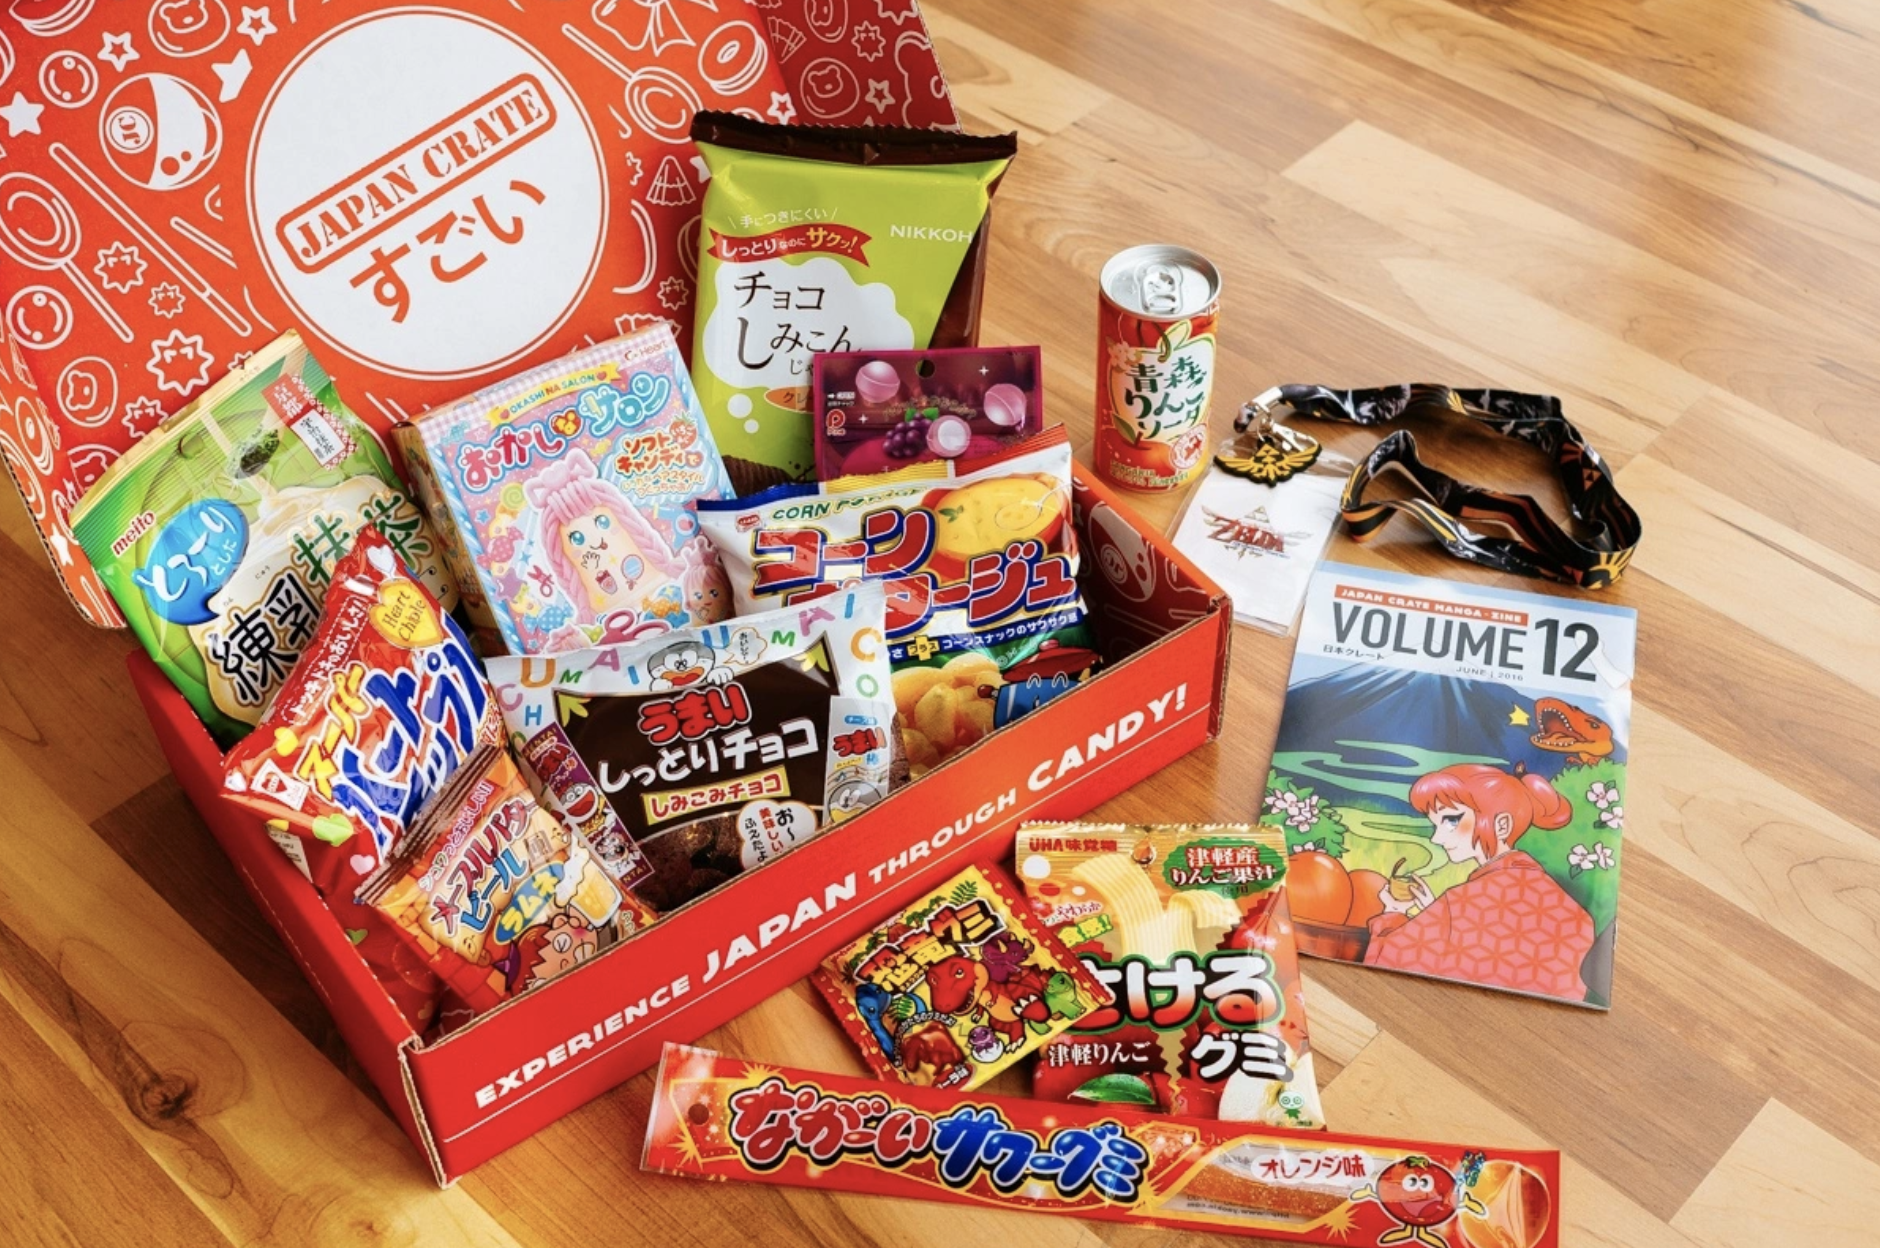 21 Food Subscription Boxes That Make Great Gifts